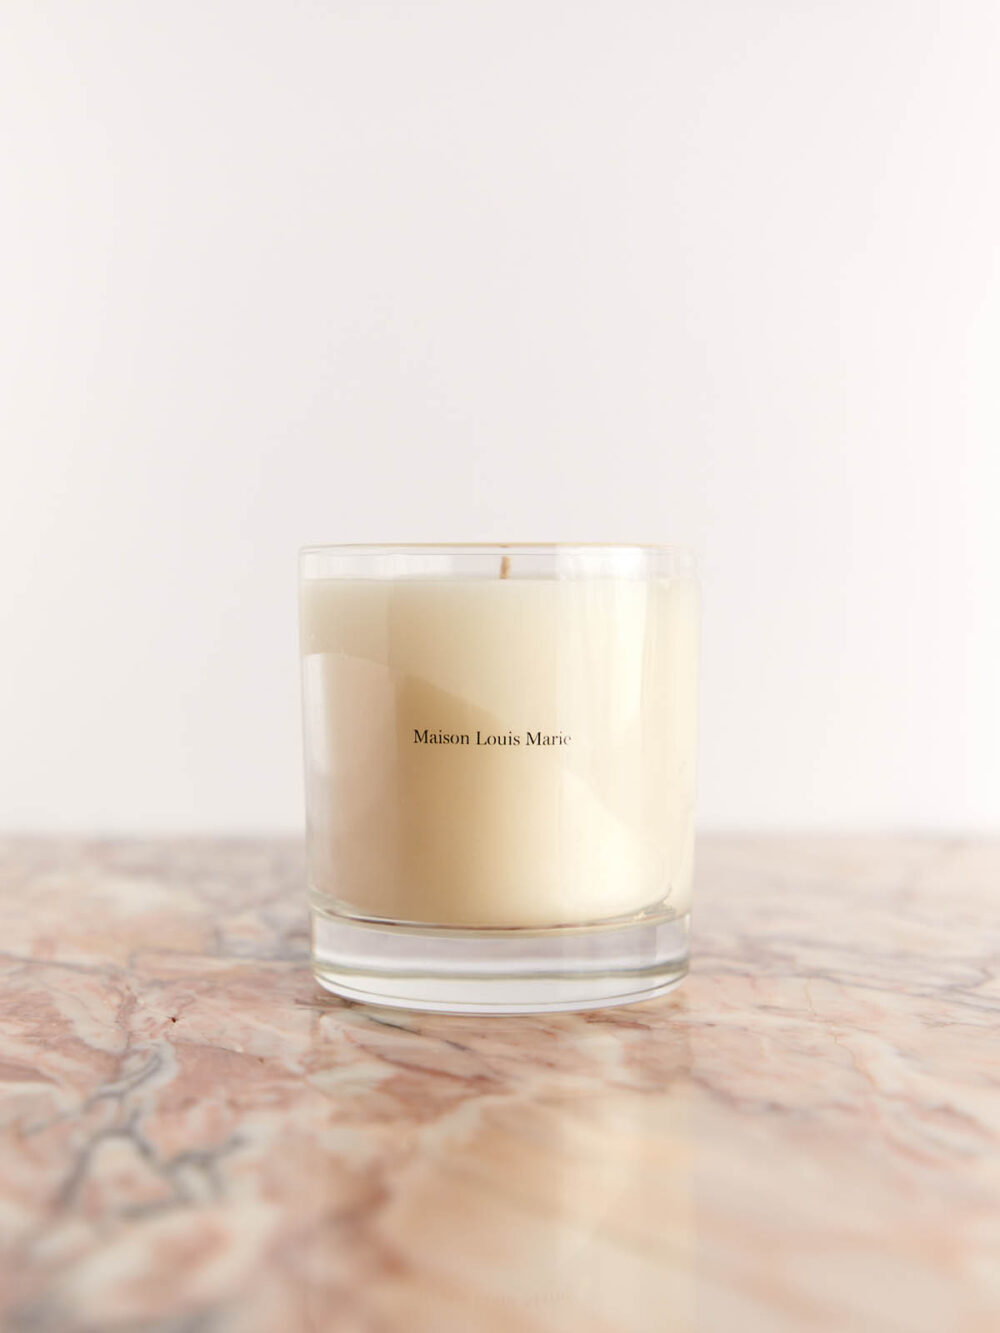 No. 04 Bois de Balincourt Candle by Maison Louis Marie on pink marble